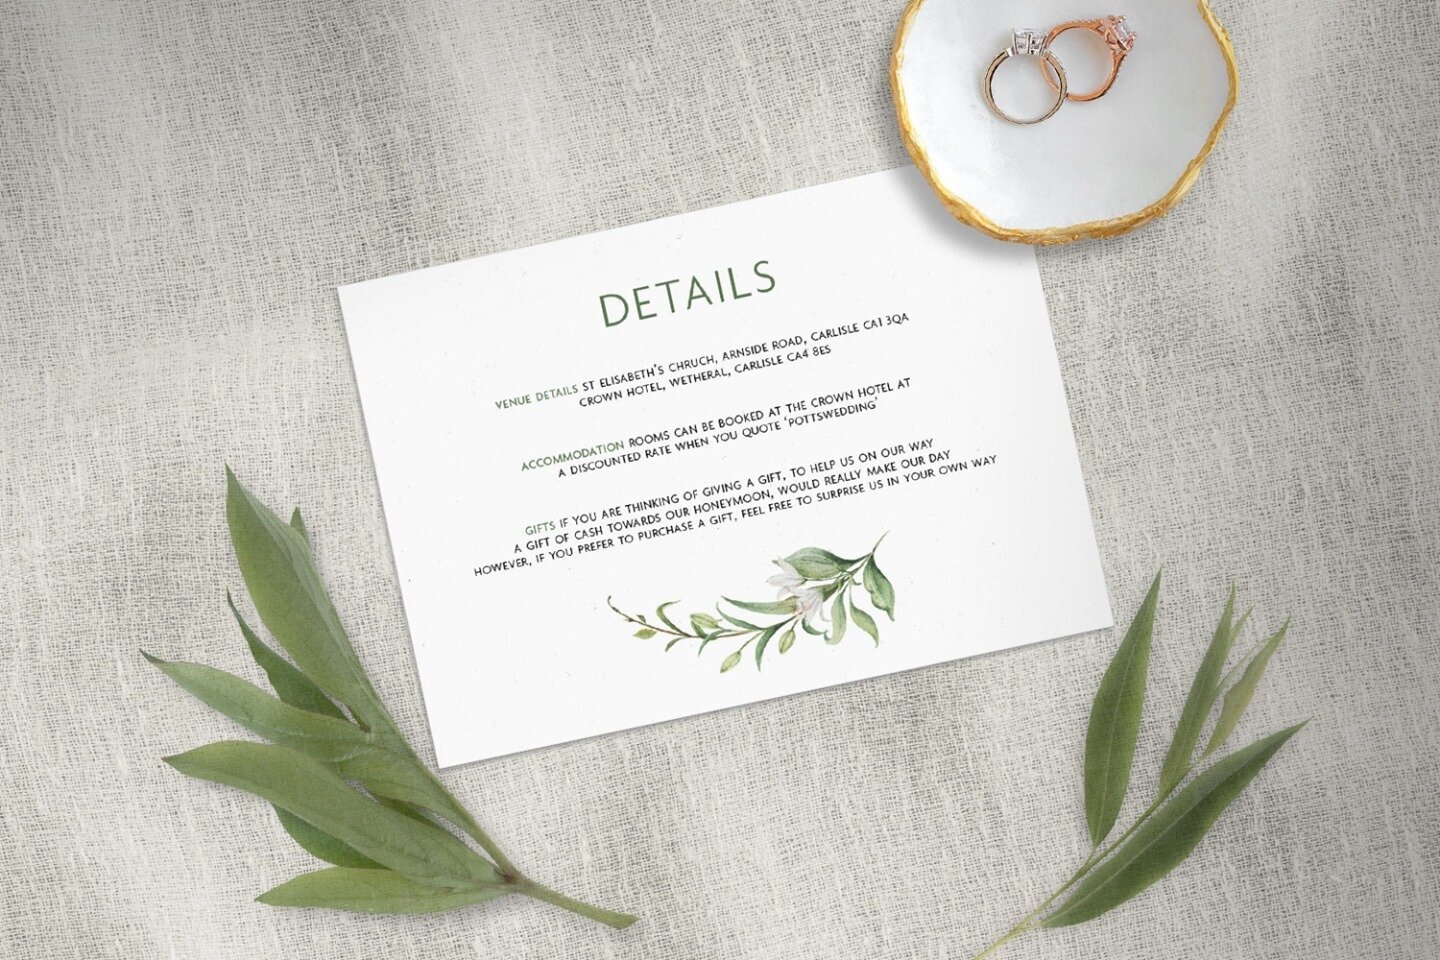 DETAILS⁠
⁠
Details and information cards is super useful for you guests AND it can minimize stress for the couple getting married to! ⁠
⁠
The last thing you need before your wedding is relatives calling/messaging you asking for directions, where they